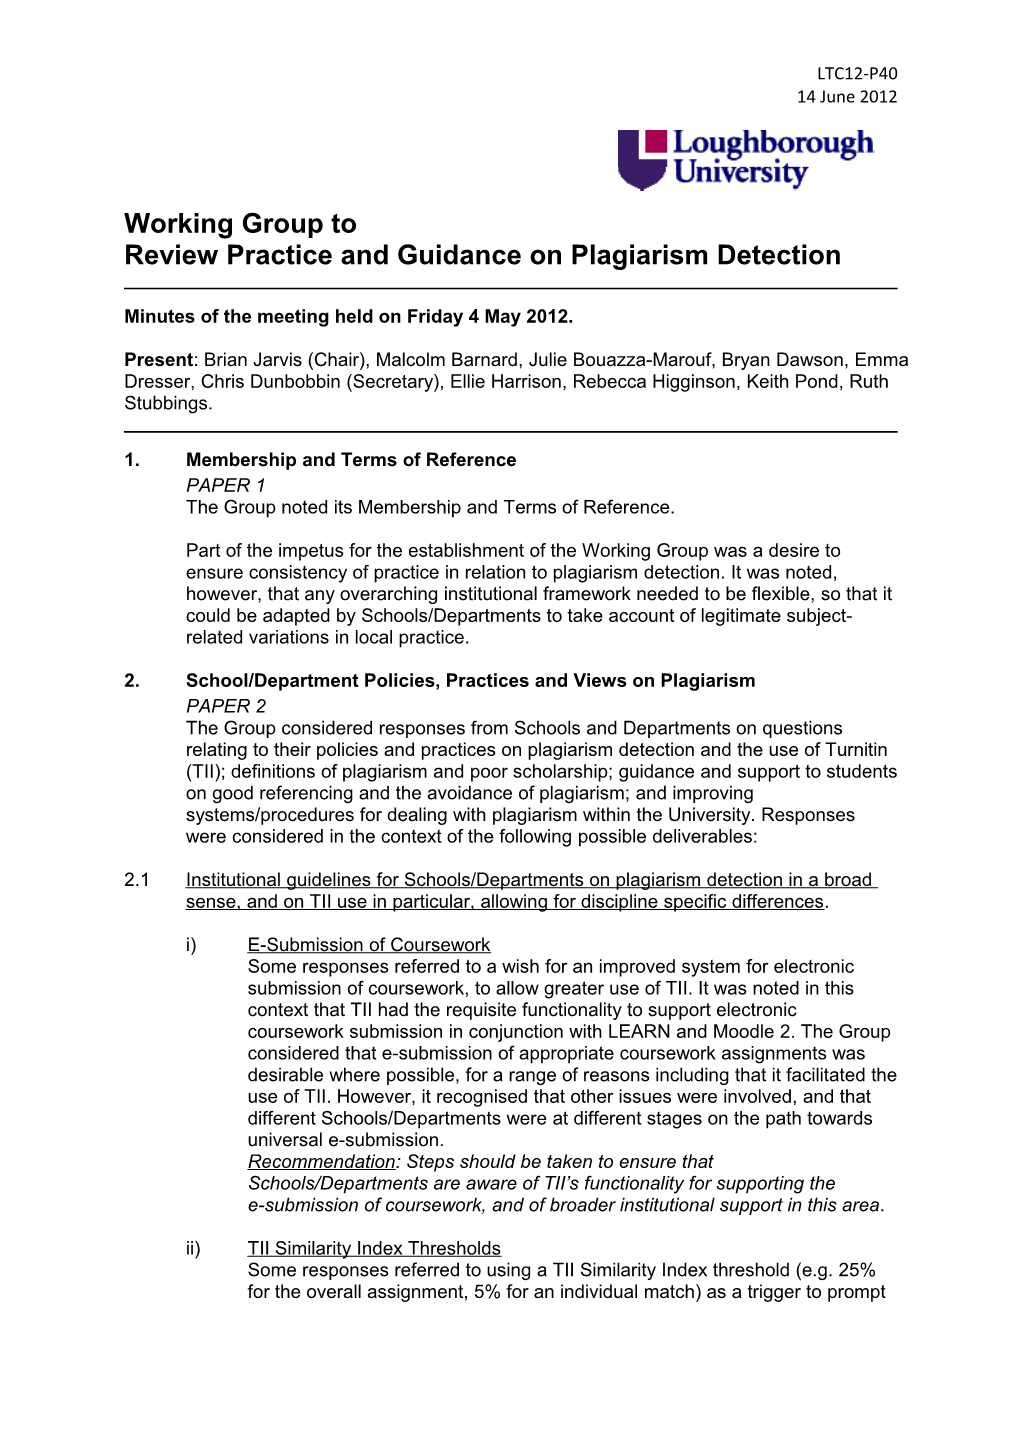 Review Practice and Guidance on Plagiarism Detection